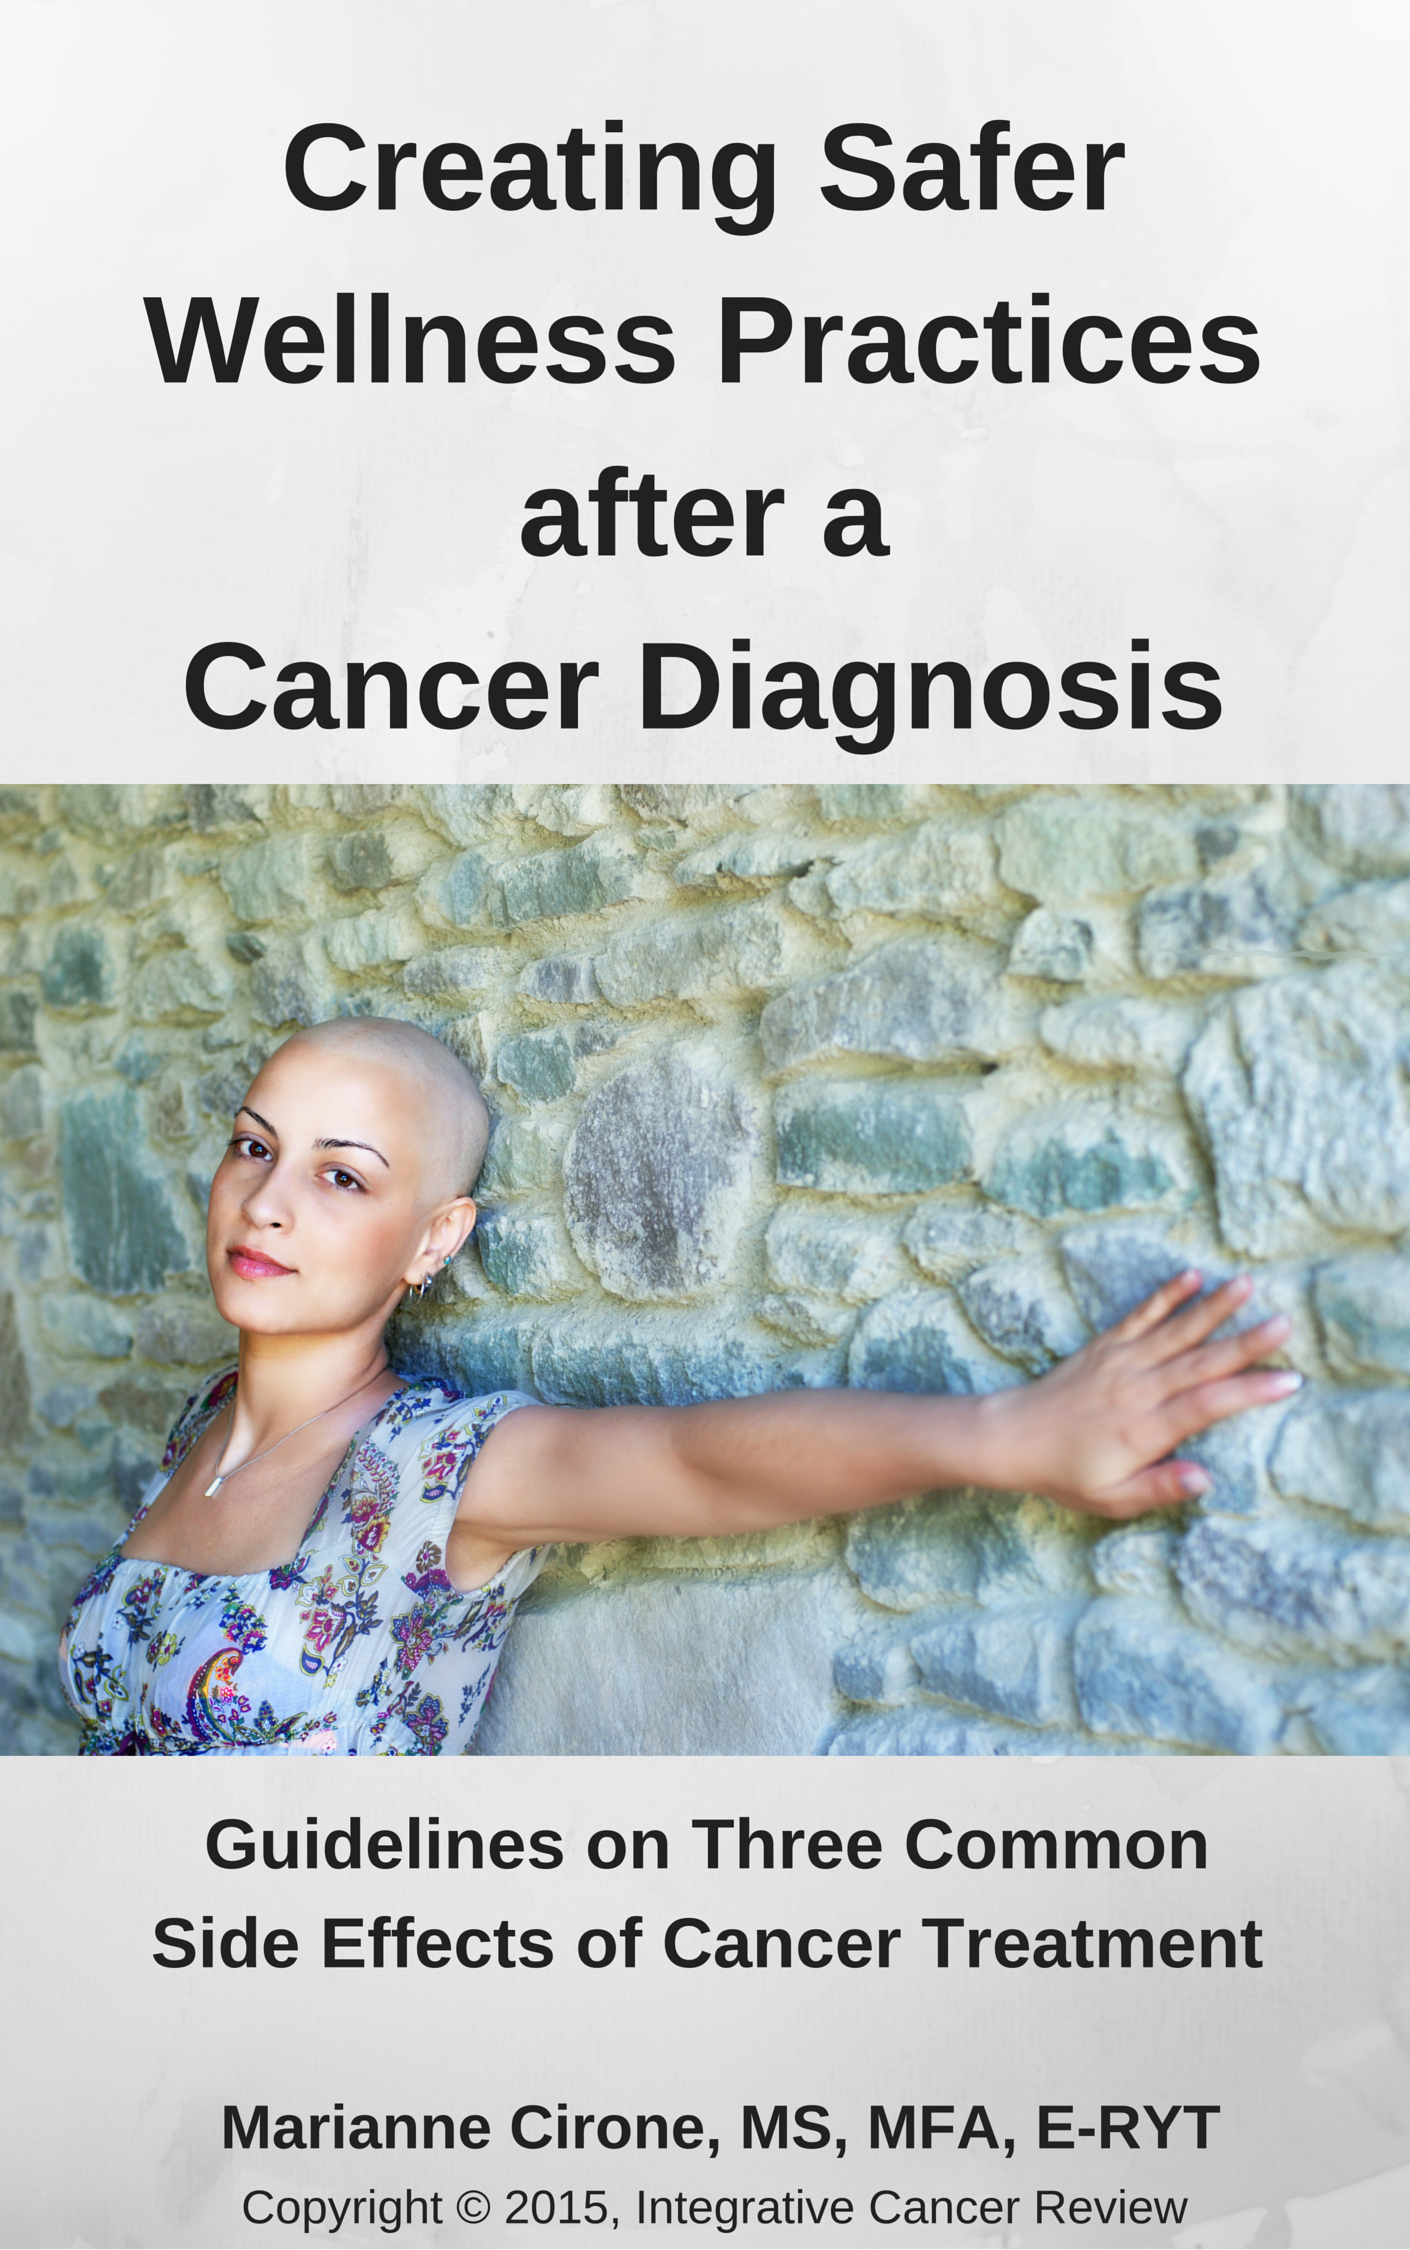 Creating Safer Wellness Practices after a Cancer Diagnosis